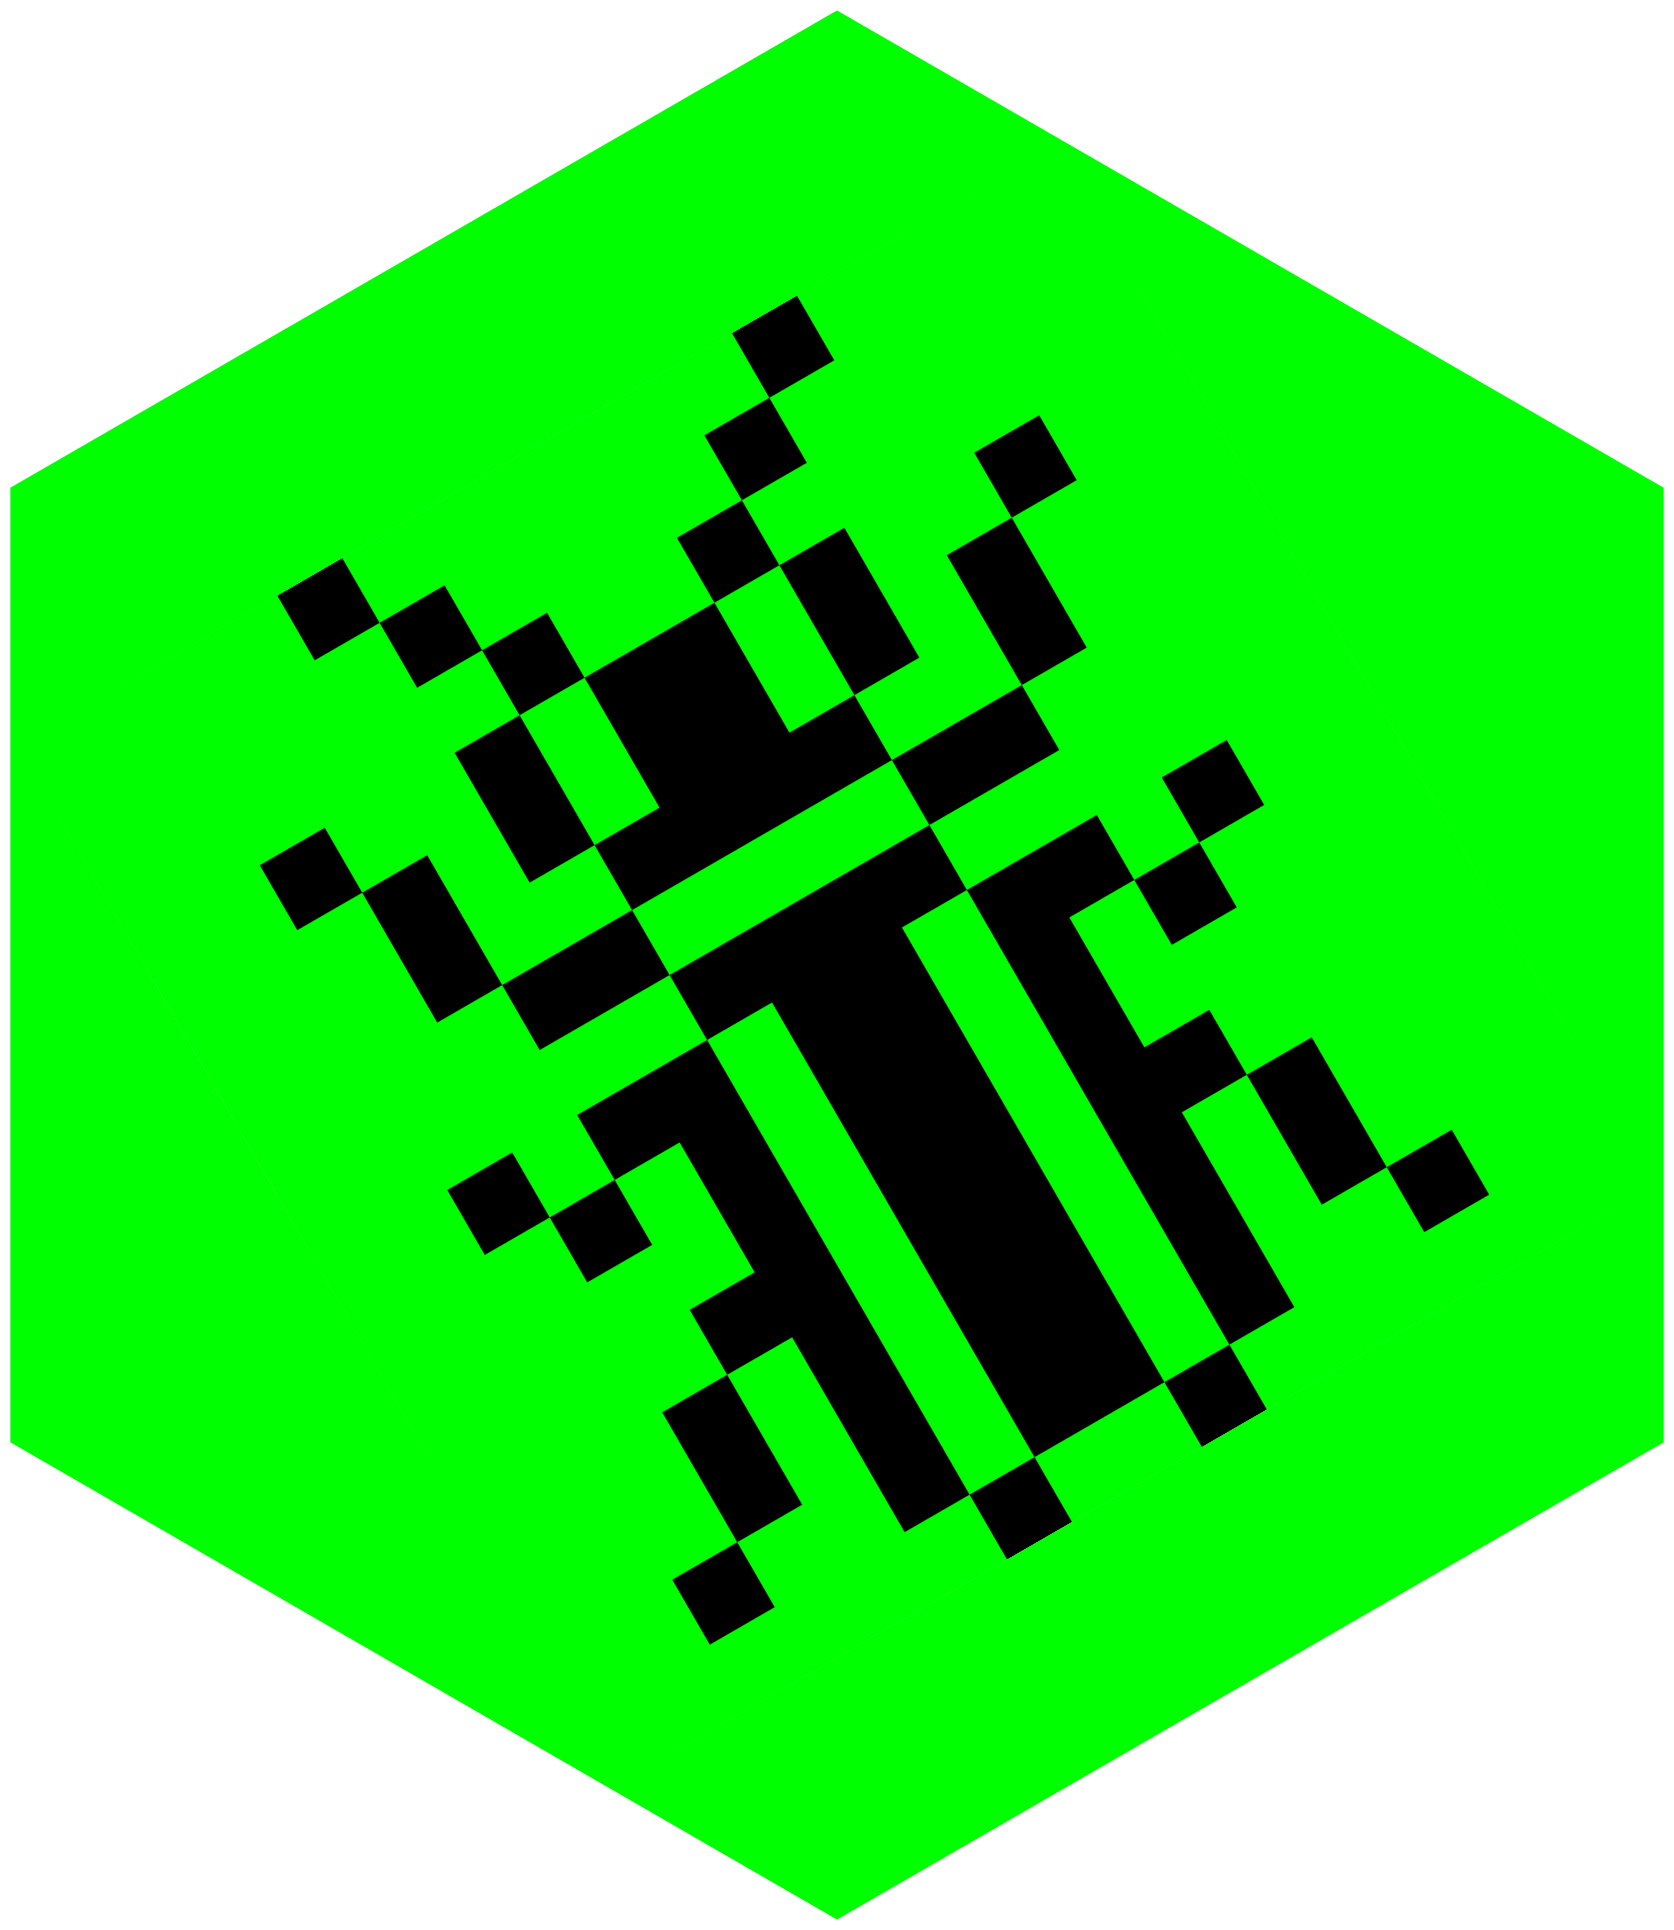 Hexagonal sticker with pixel-art of the the rostrum.blog insect logo on it.